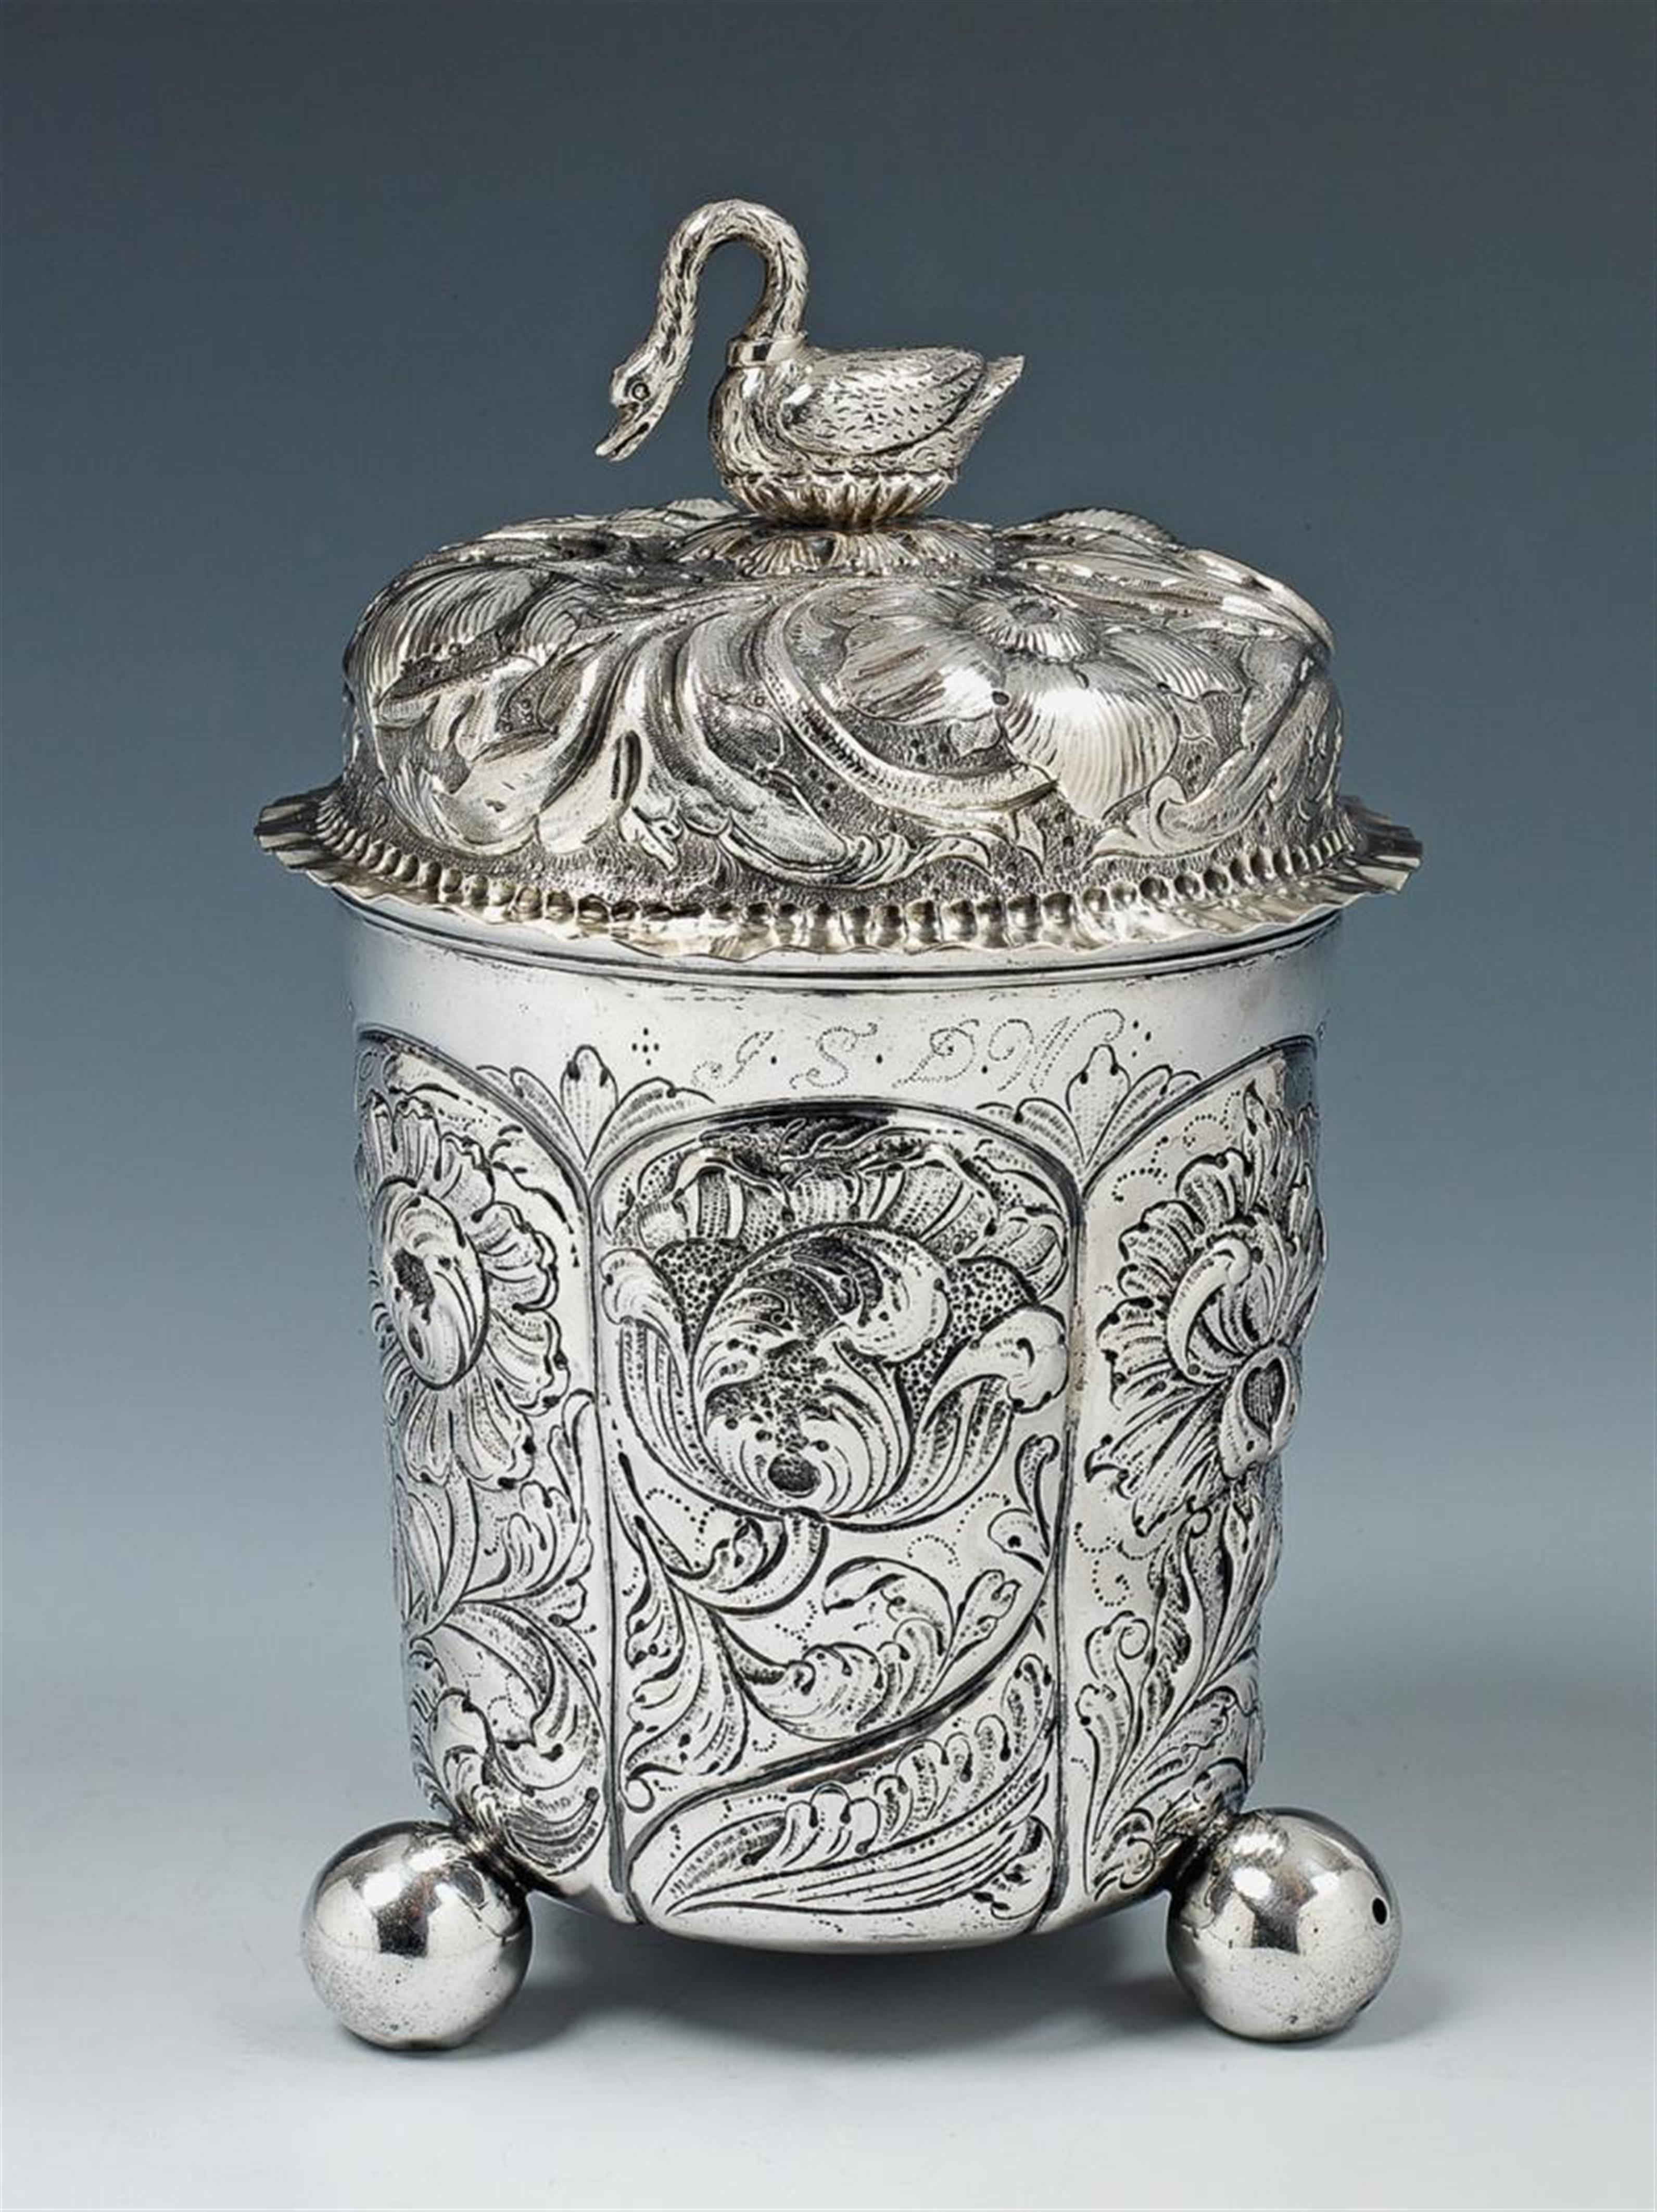 A silver partially gilt beaker and cover. Engraved "GSDW 1675 NMS". Probably North German, possibly with marks of Hans Carl Nasser, second half 17th C. - image-1